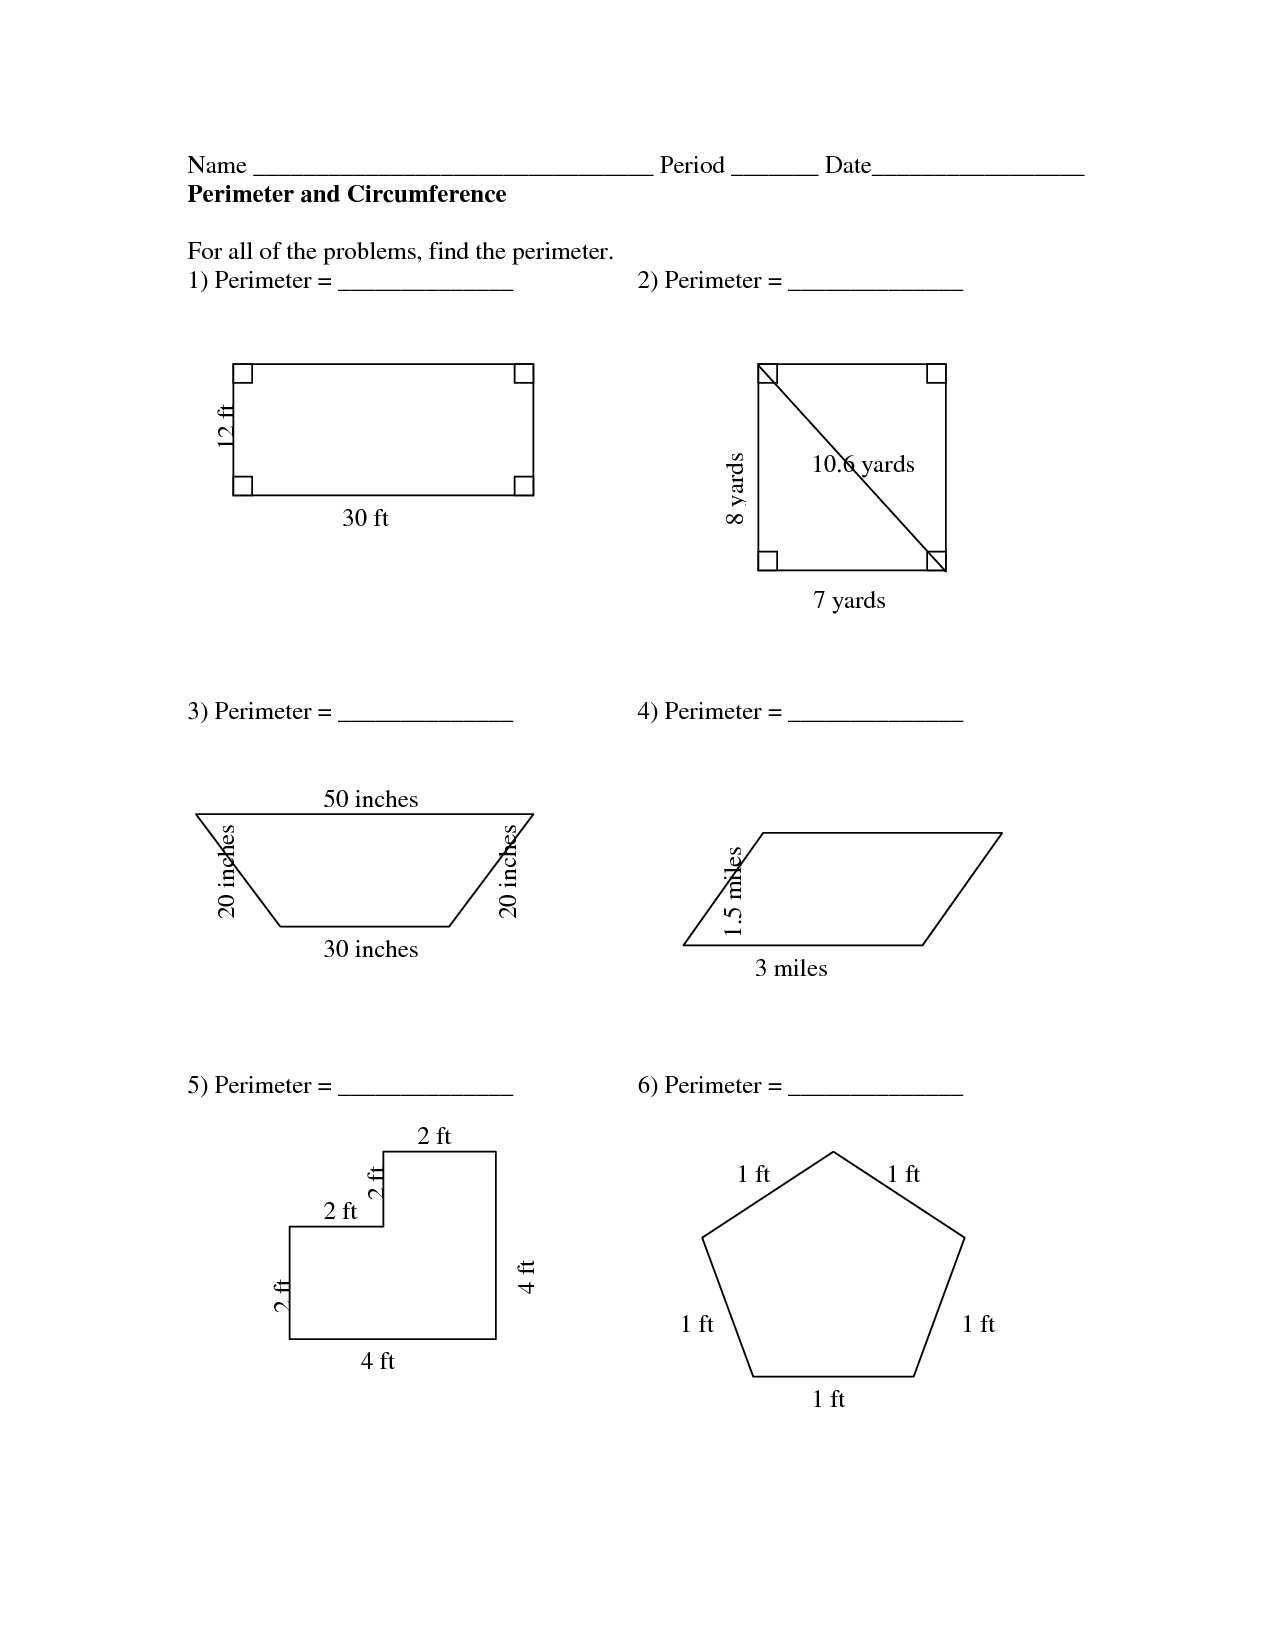 8 Best Images of Area Circumference Circle Worksheet - Geometry Circle ...